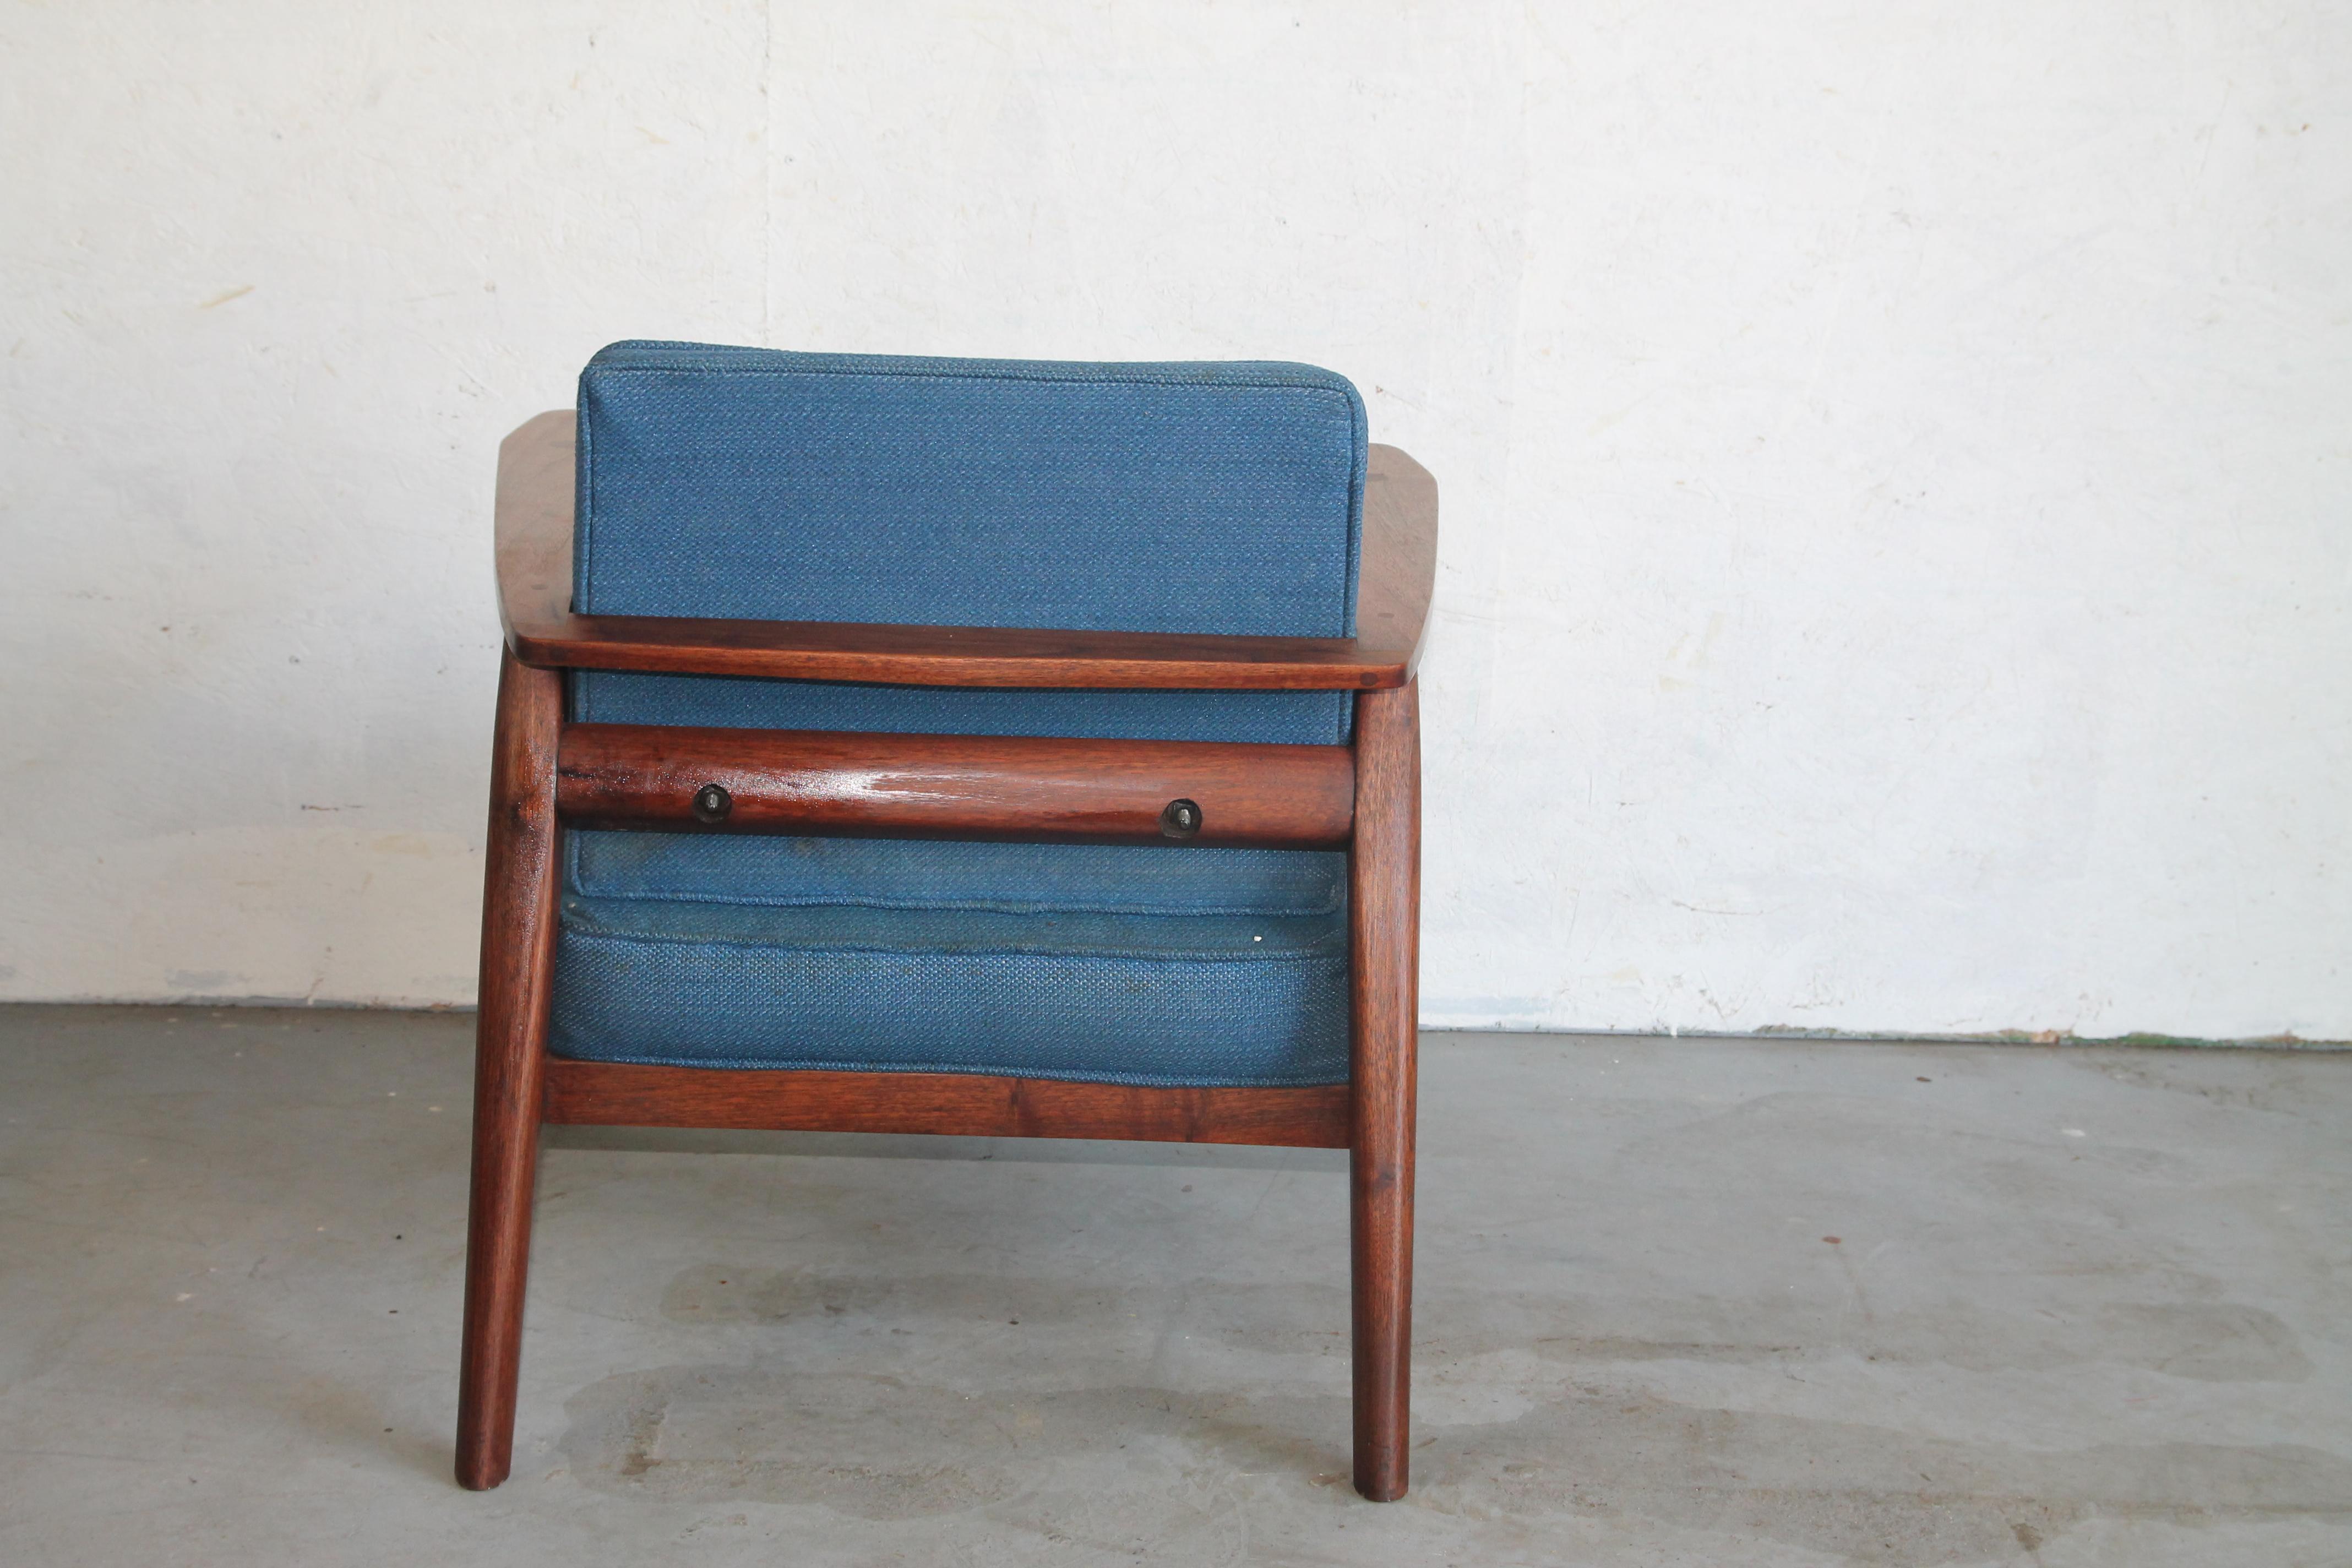 American Studio Designed Midcentury Lounge Chair For Sale